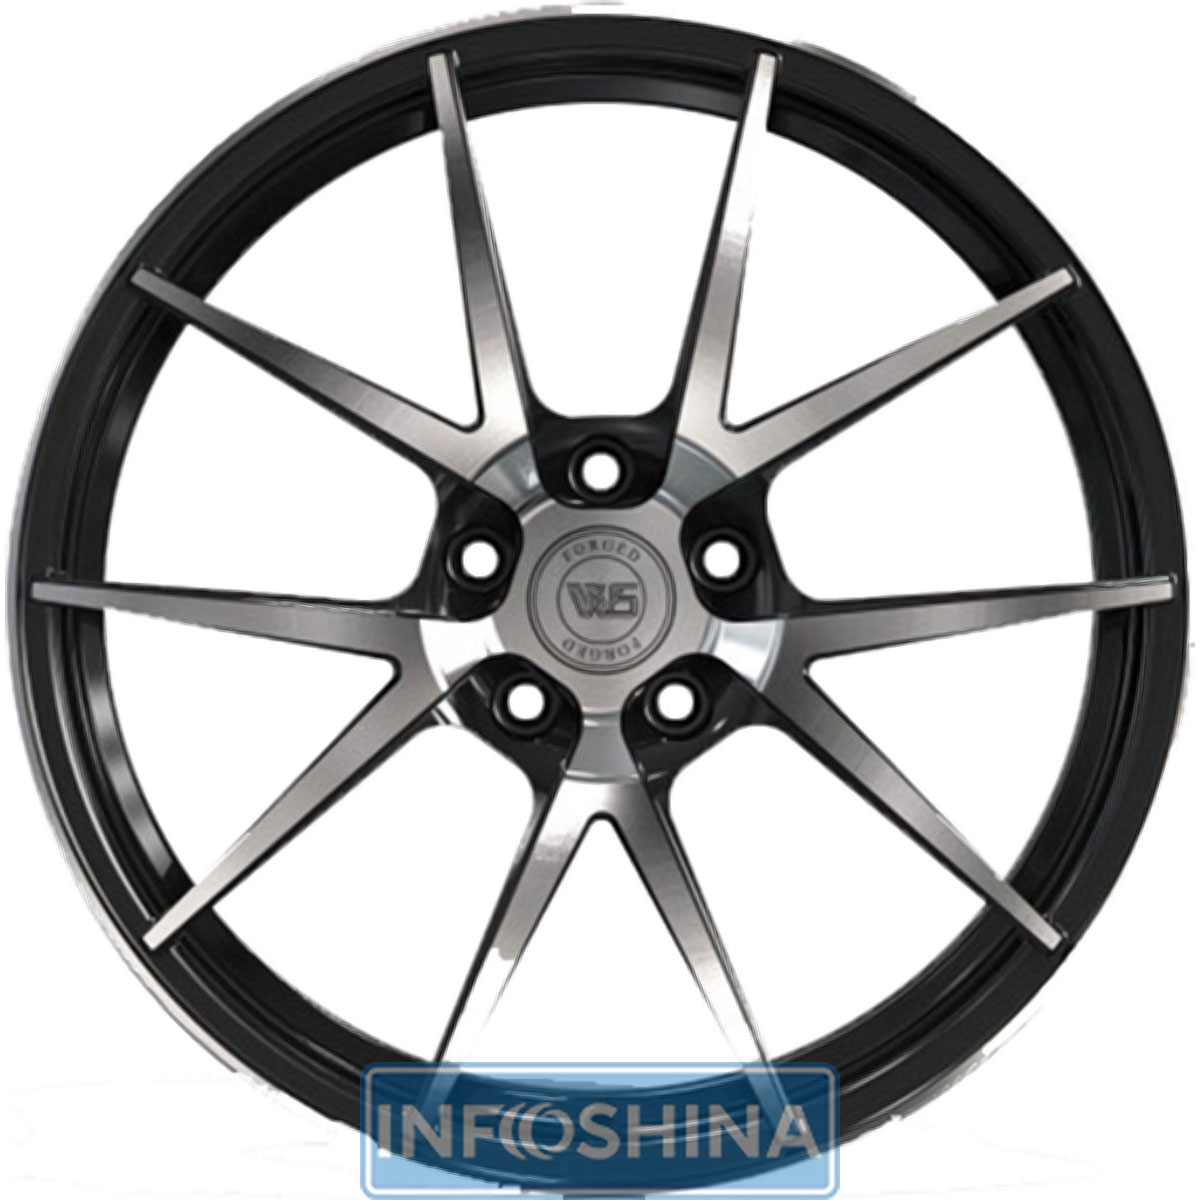 Купити диски WS Forged WS2259 Gloss Black With Machined Face R19 W8 PCD5x114.3 ET45 DIA67.1